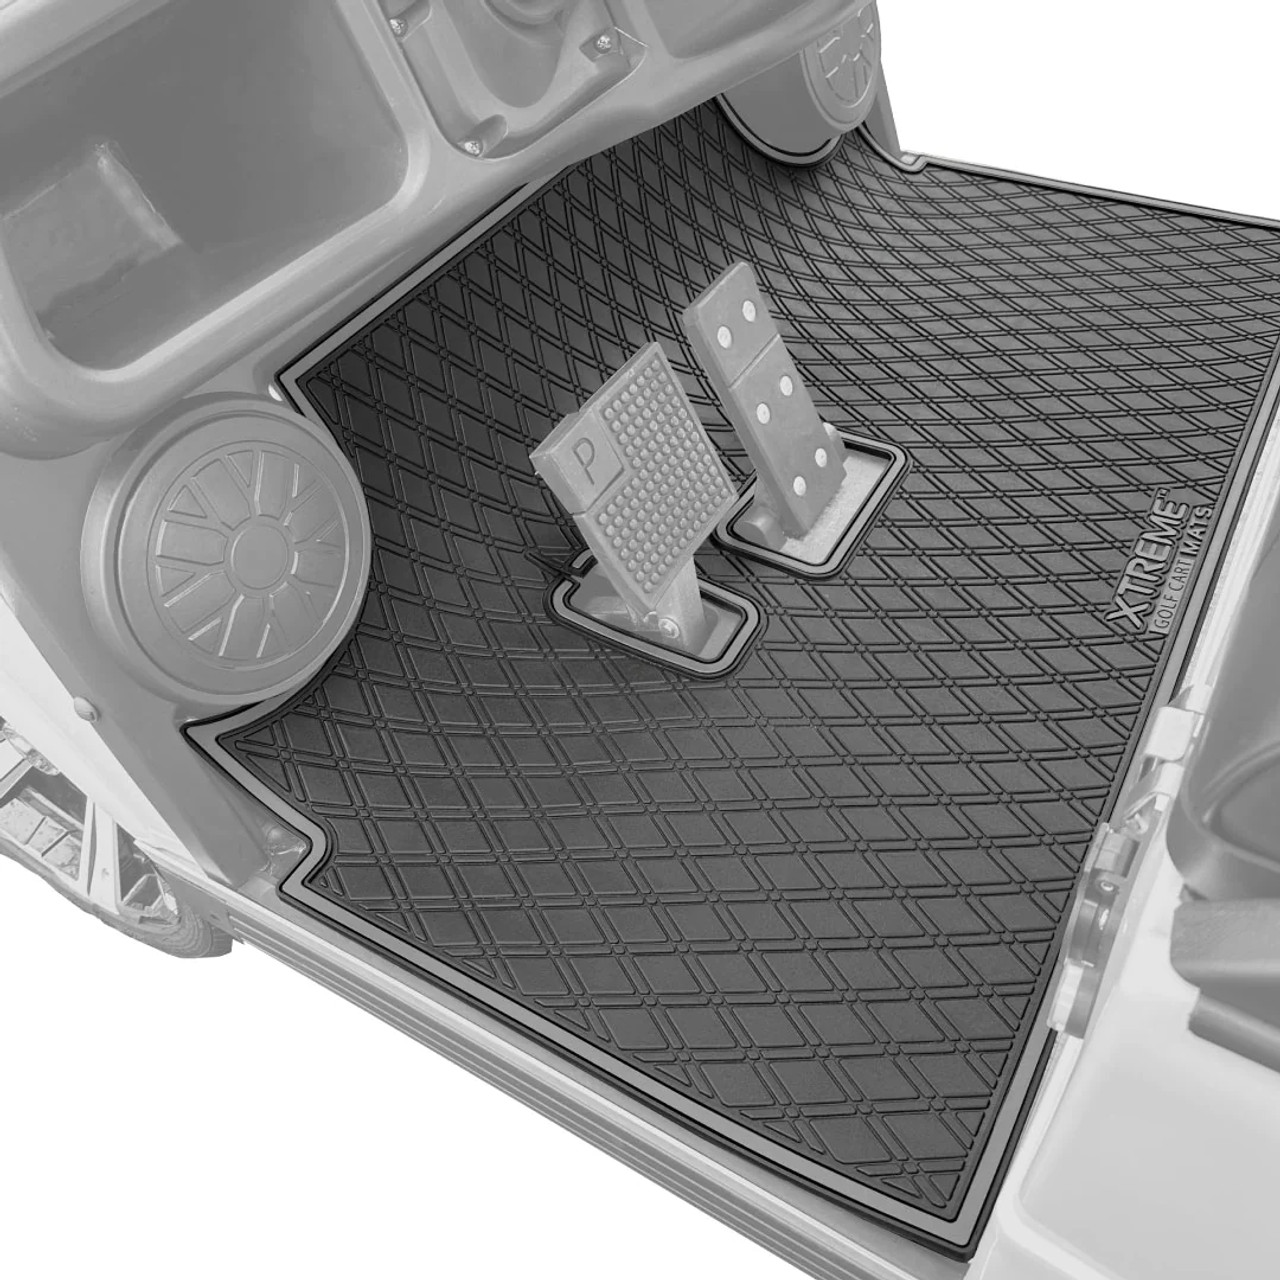 Evolution Floor Mats- Fits Classic 4 Pro/ Classic 4 Plus & Forester Only!